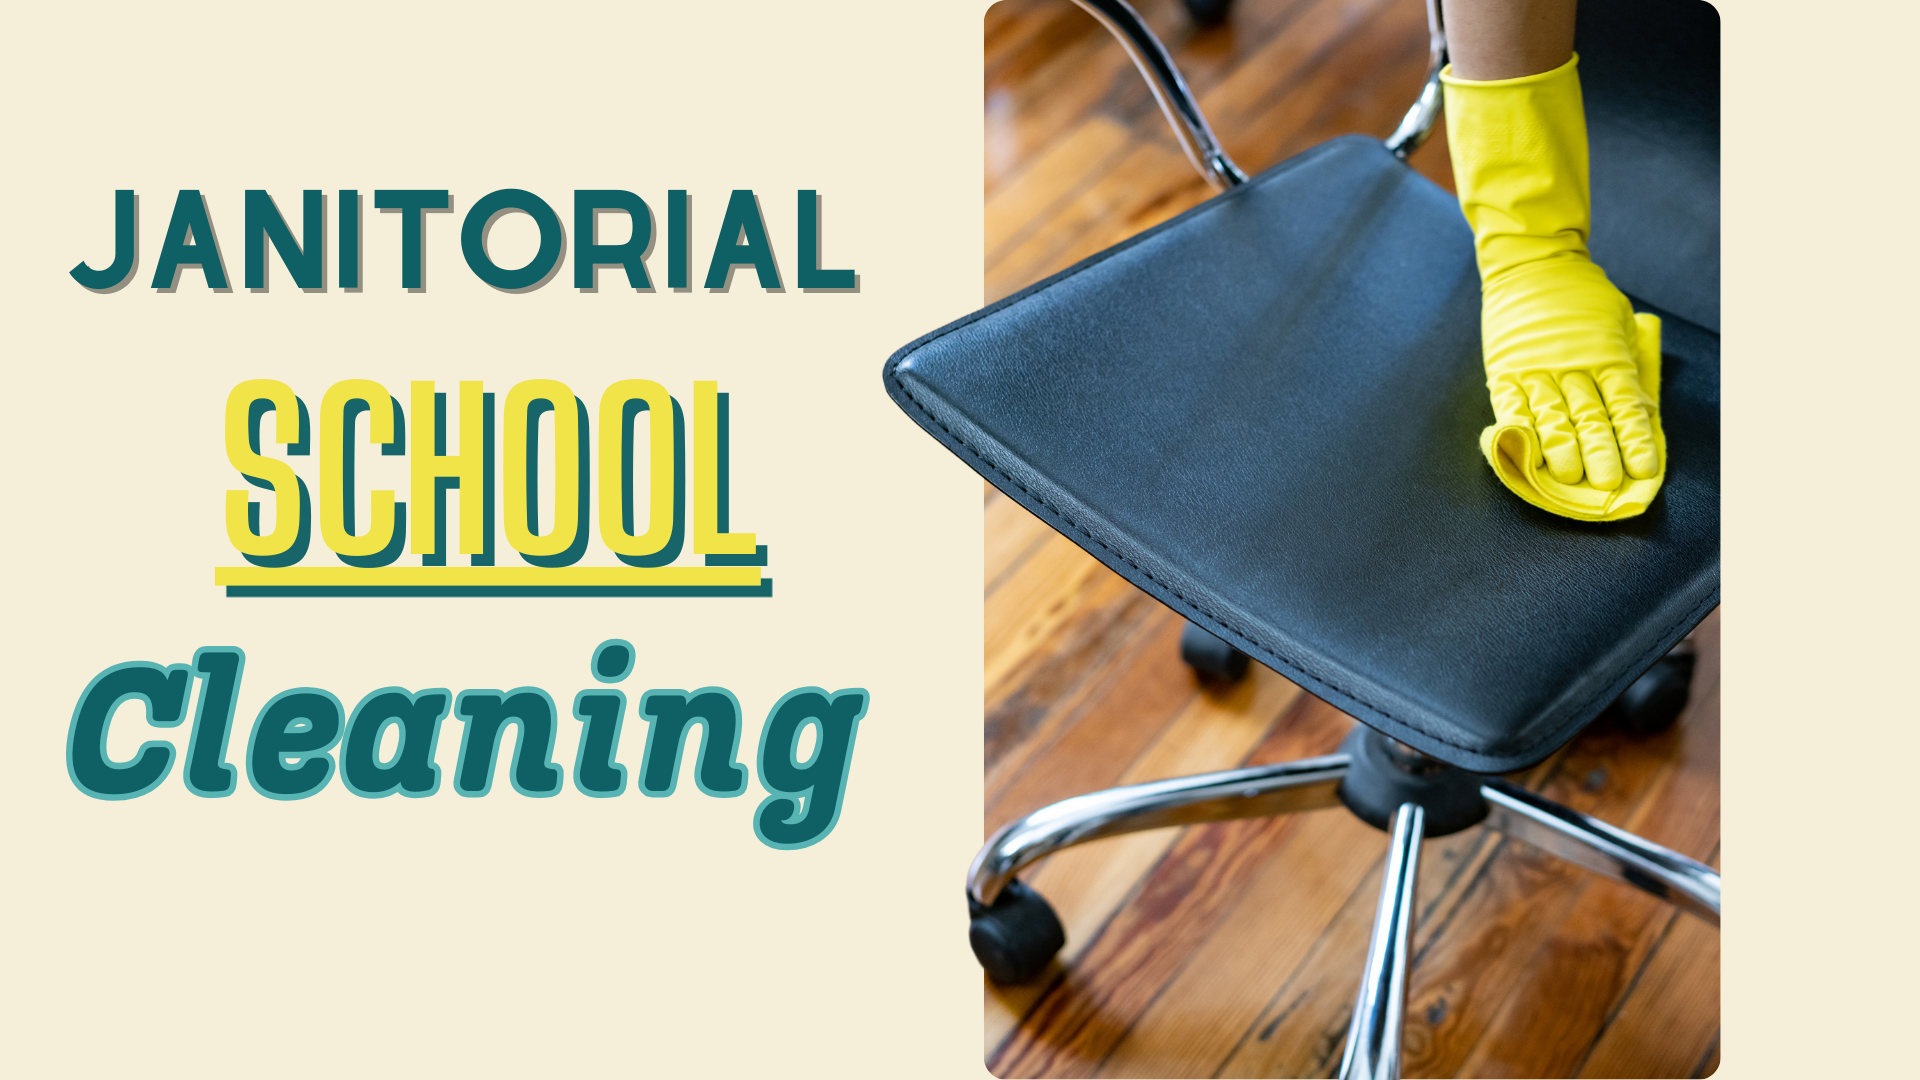 Janitorial School Cleaning